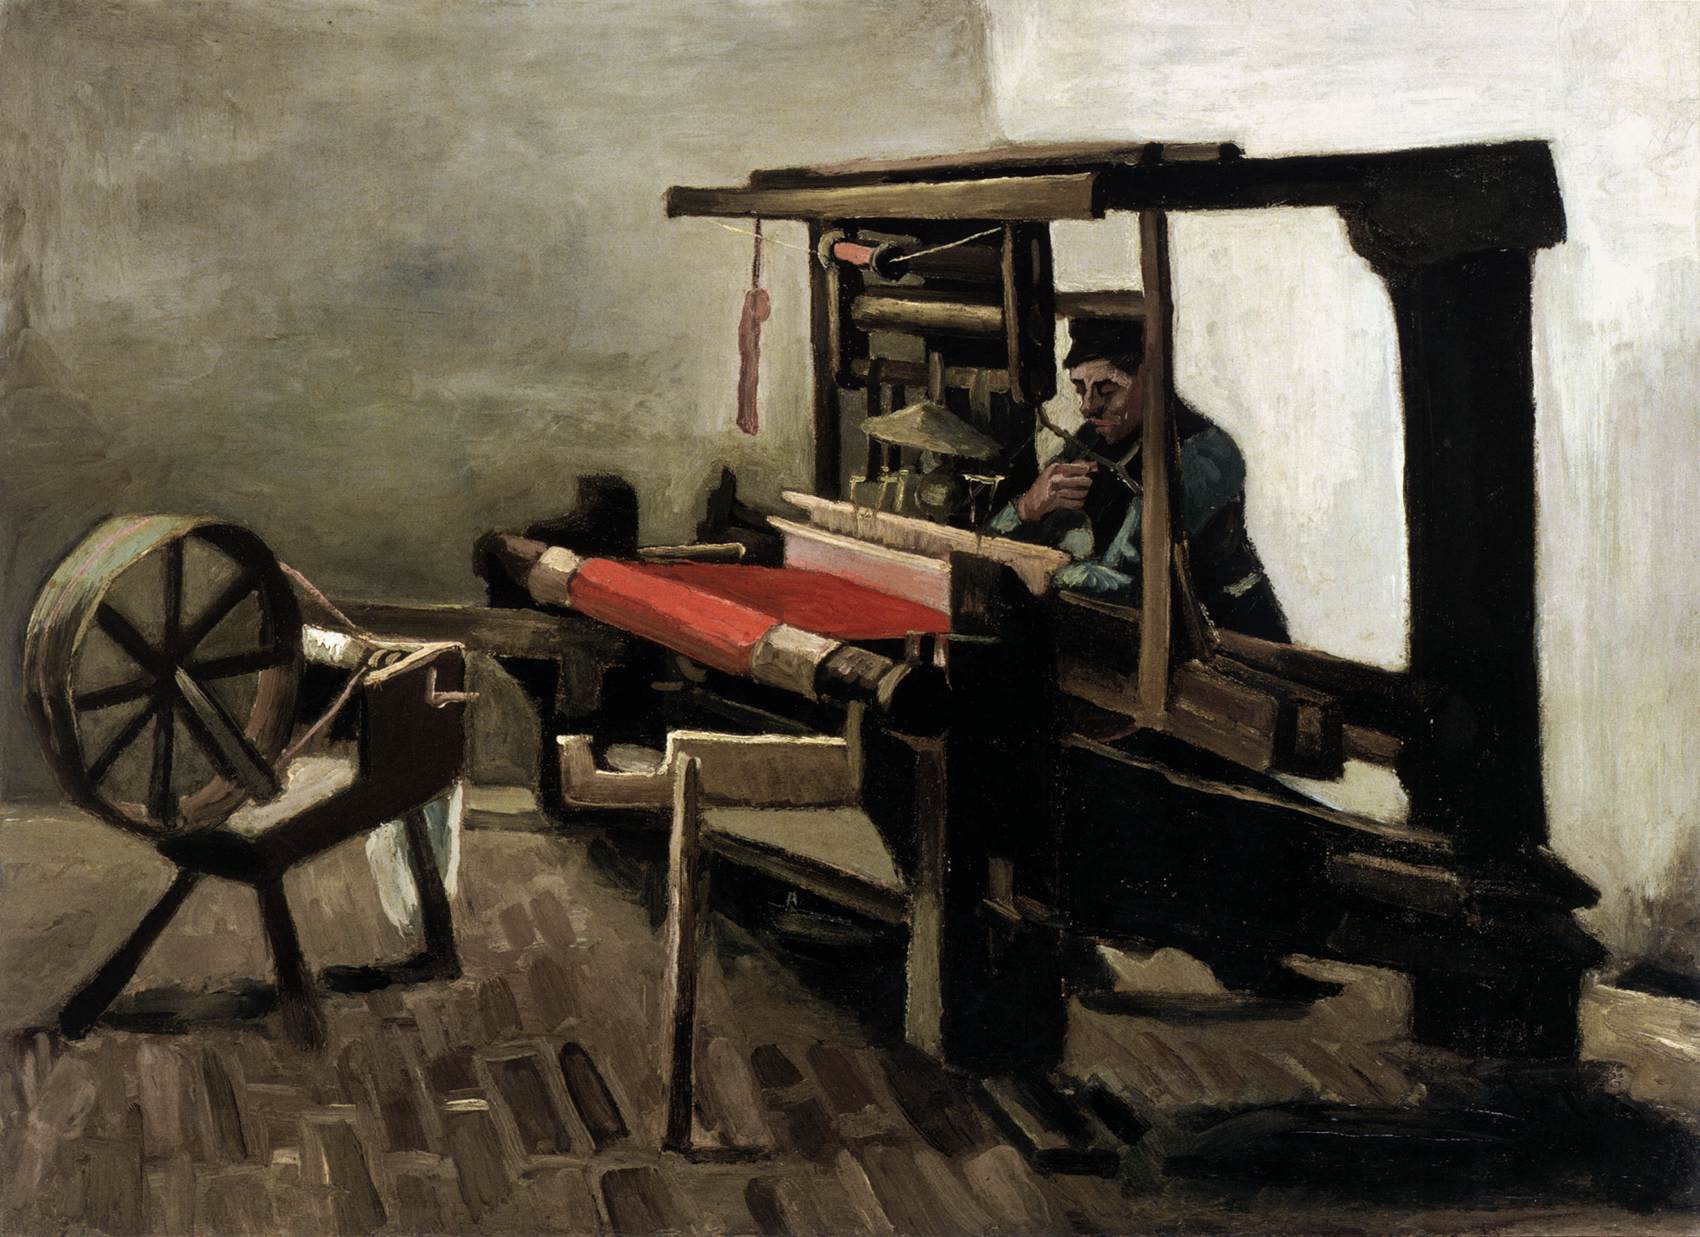 Weaver Facing Left, with Spinning Wheel